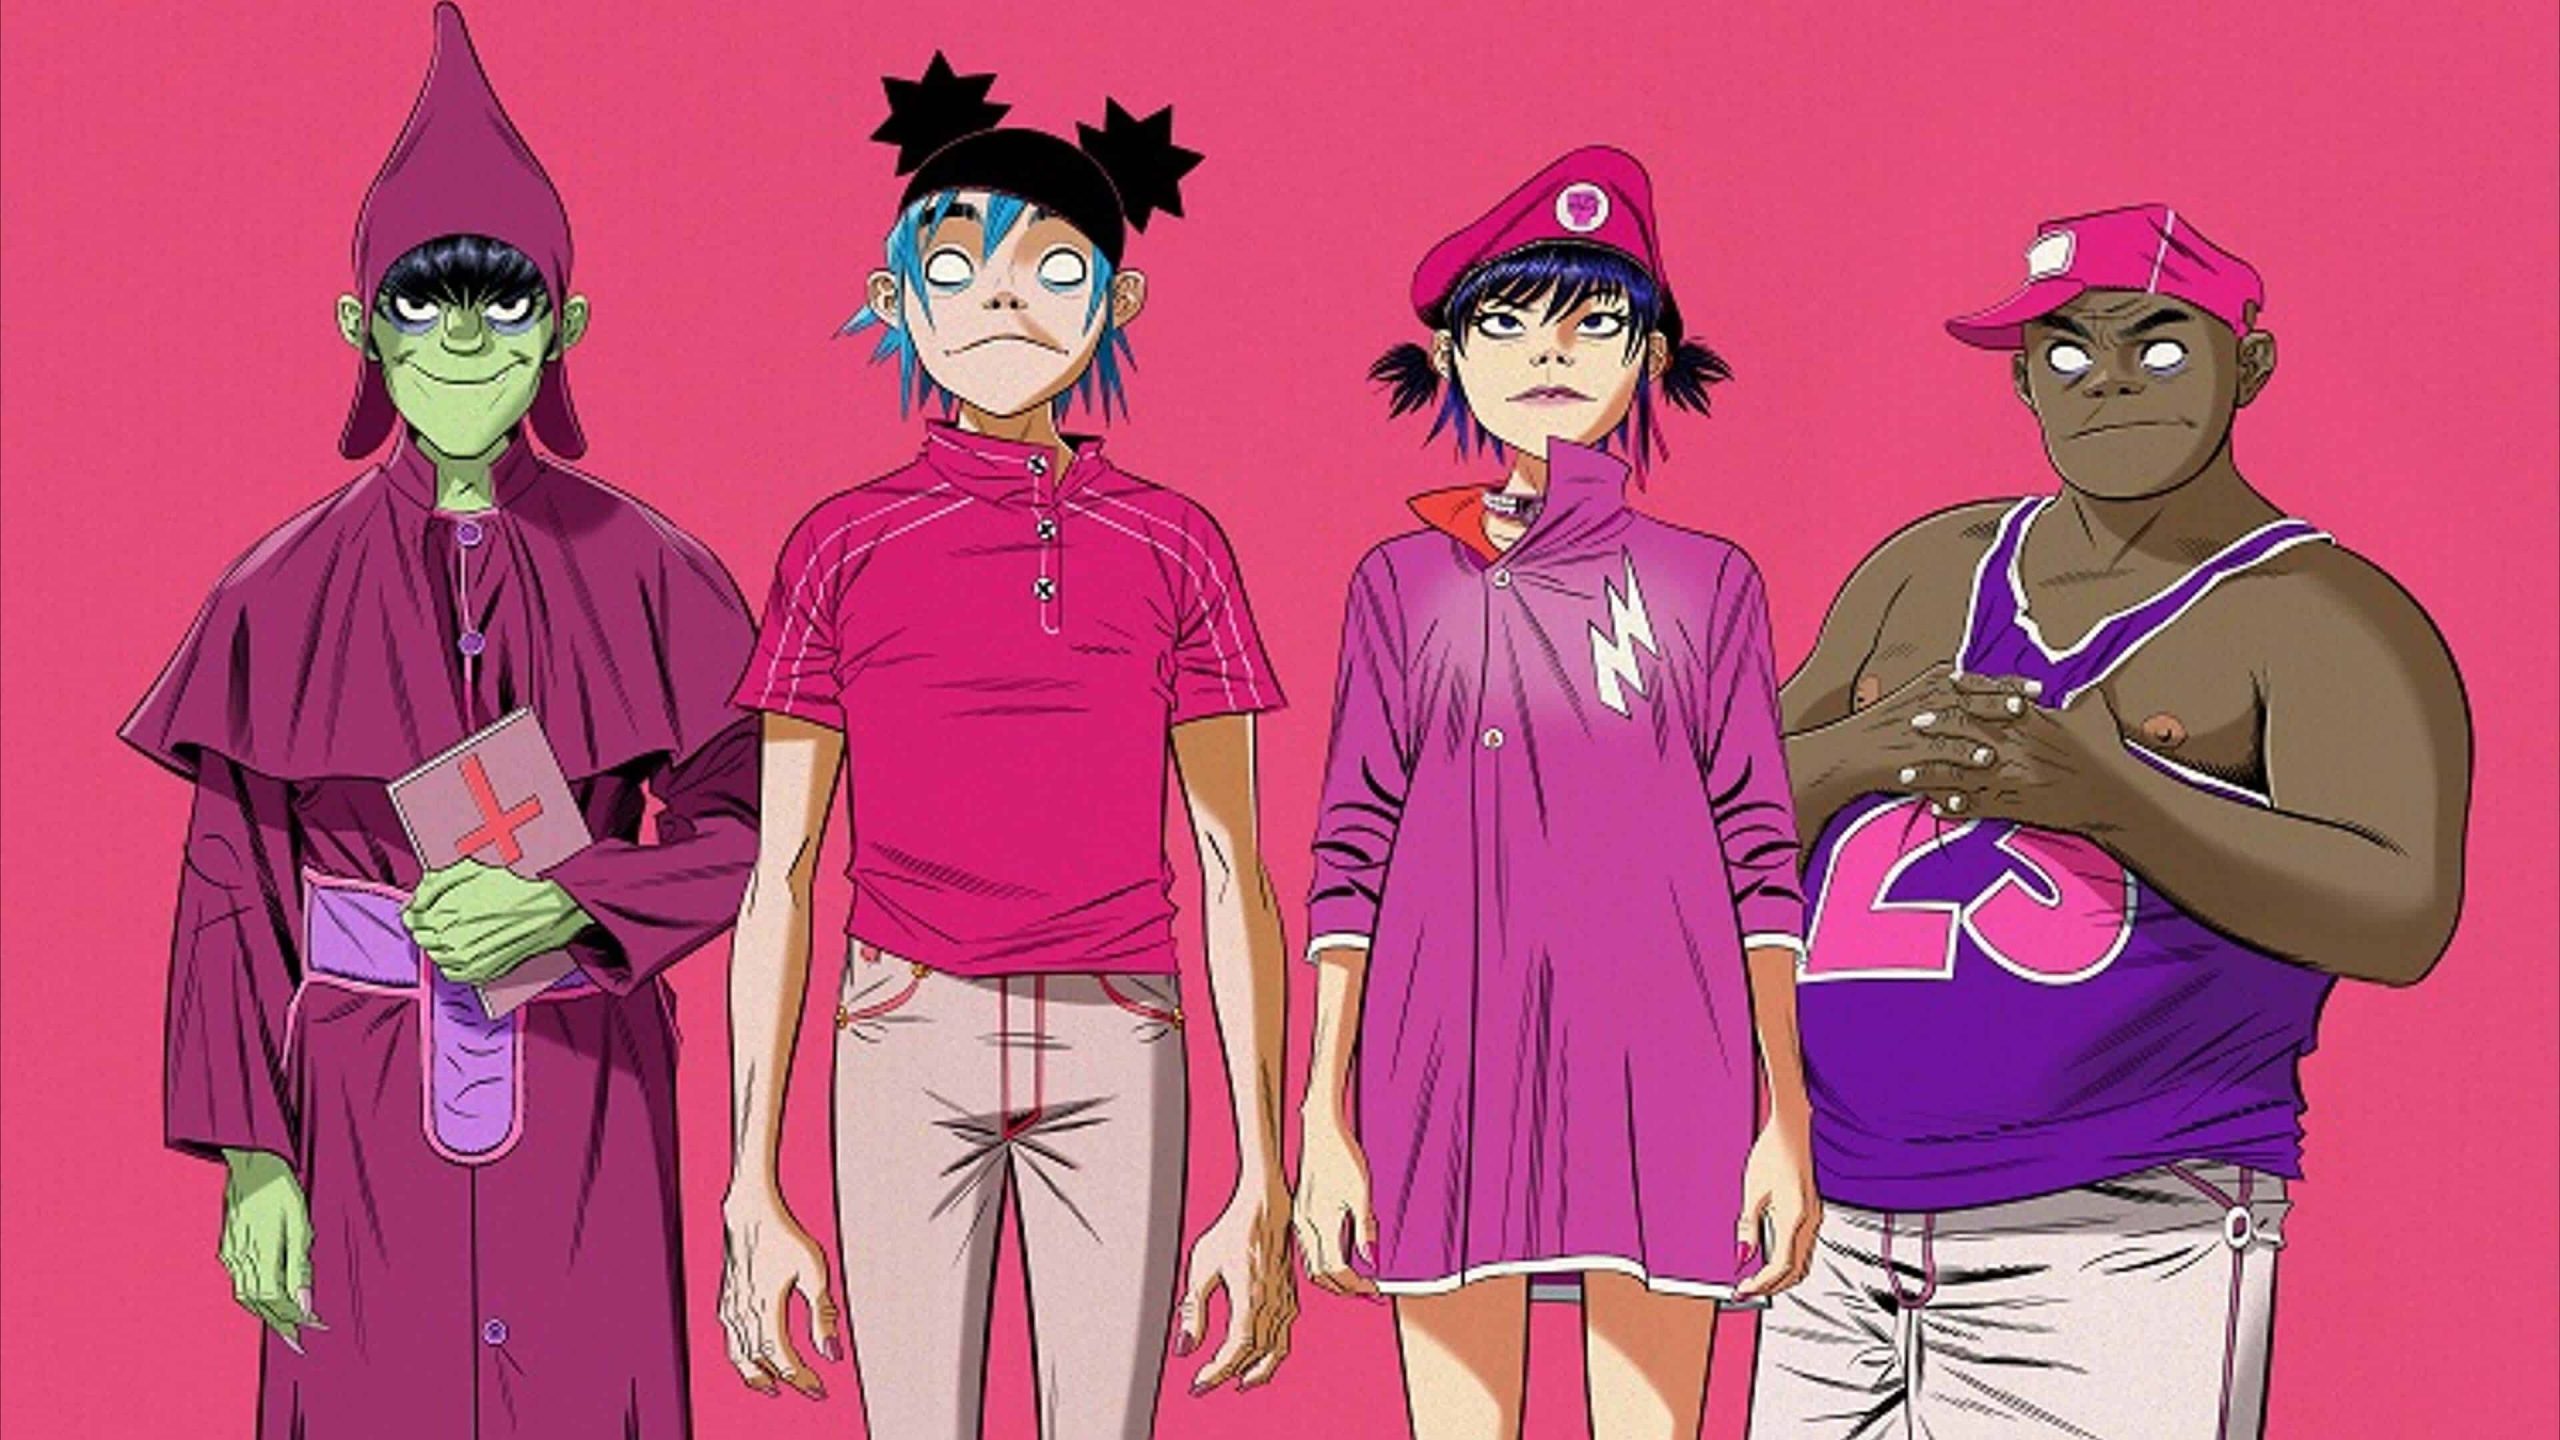 Gorillaz have announced the complete schedule for The Getaway